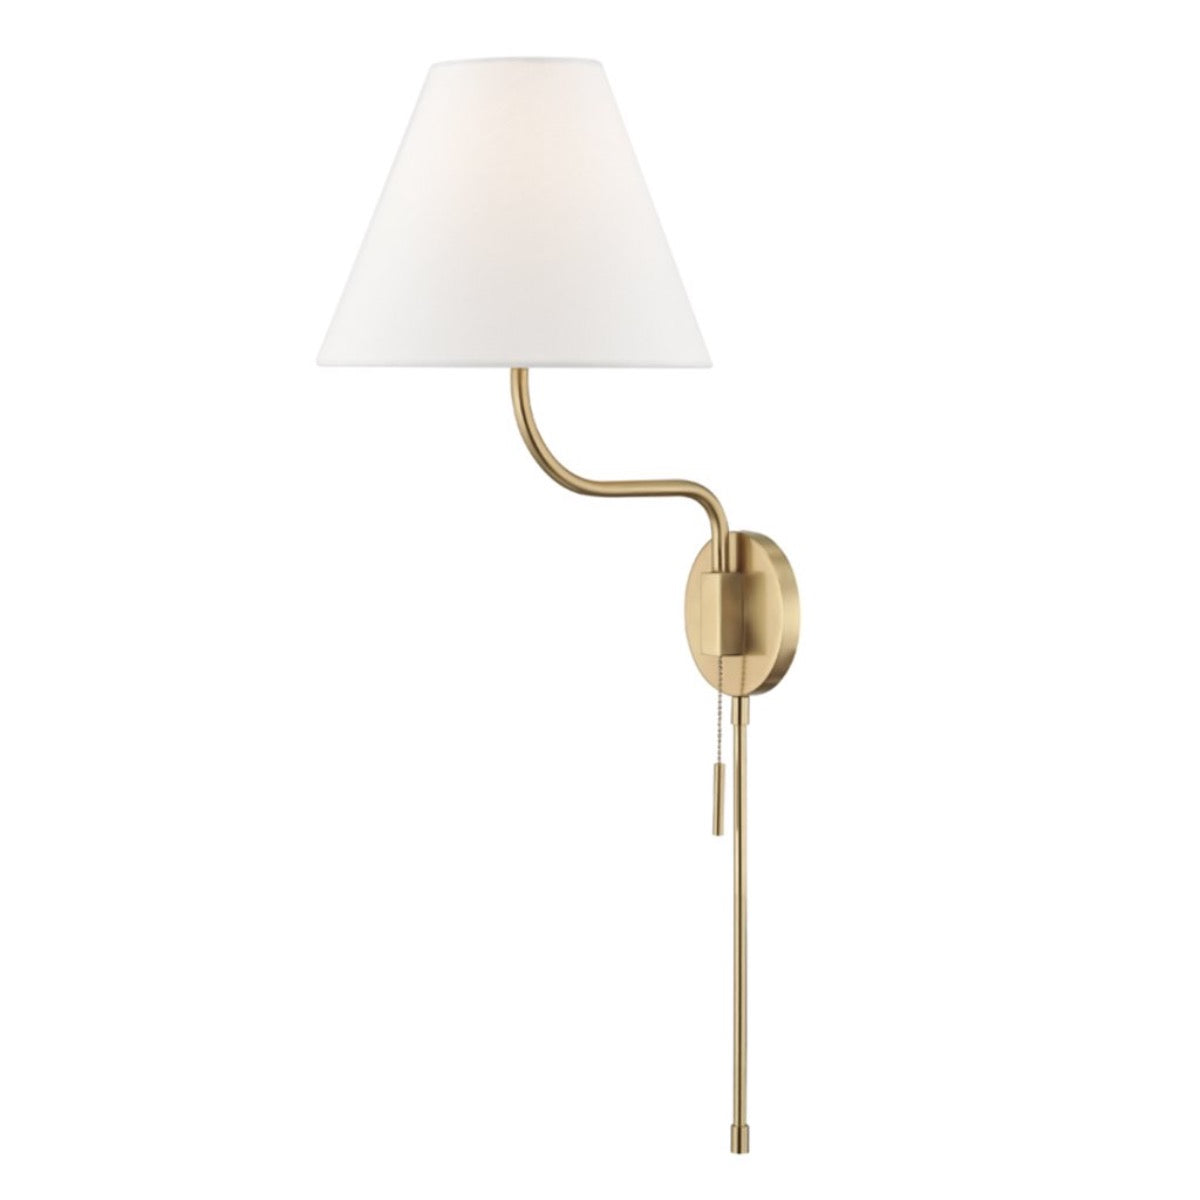 Flynn Sconce Aged Brass. Left angle view.